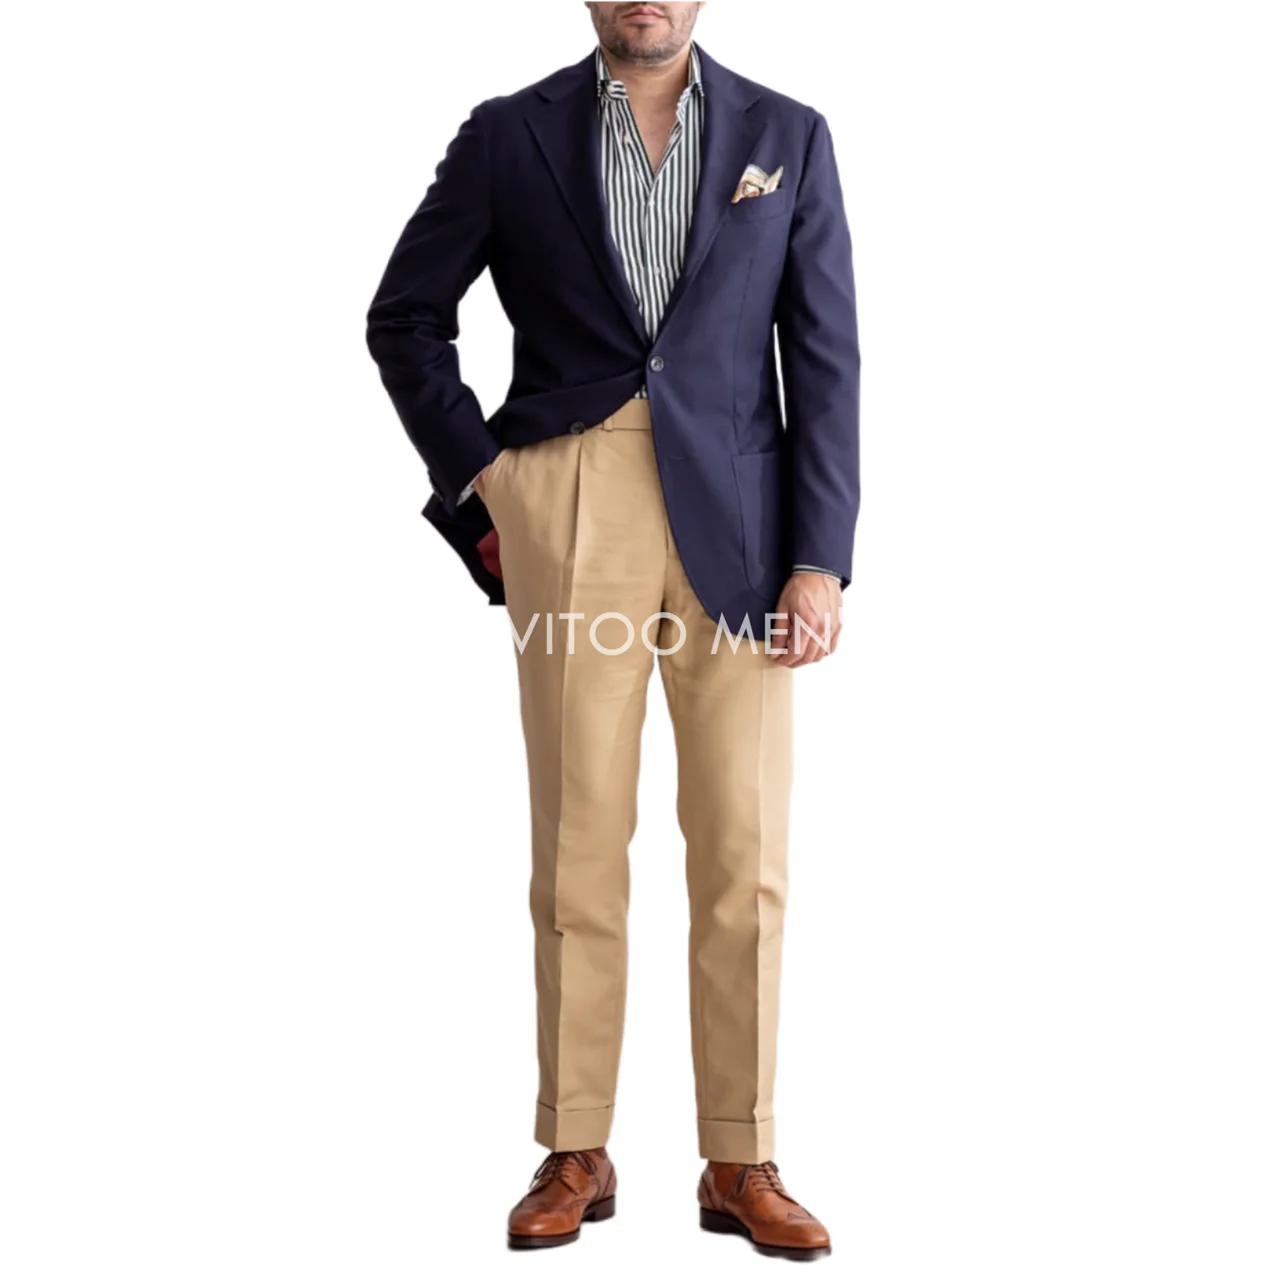 Khaki Cotton Blazer with Navy Chinos and Suede Loafers | He Spoke Style